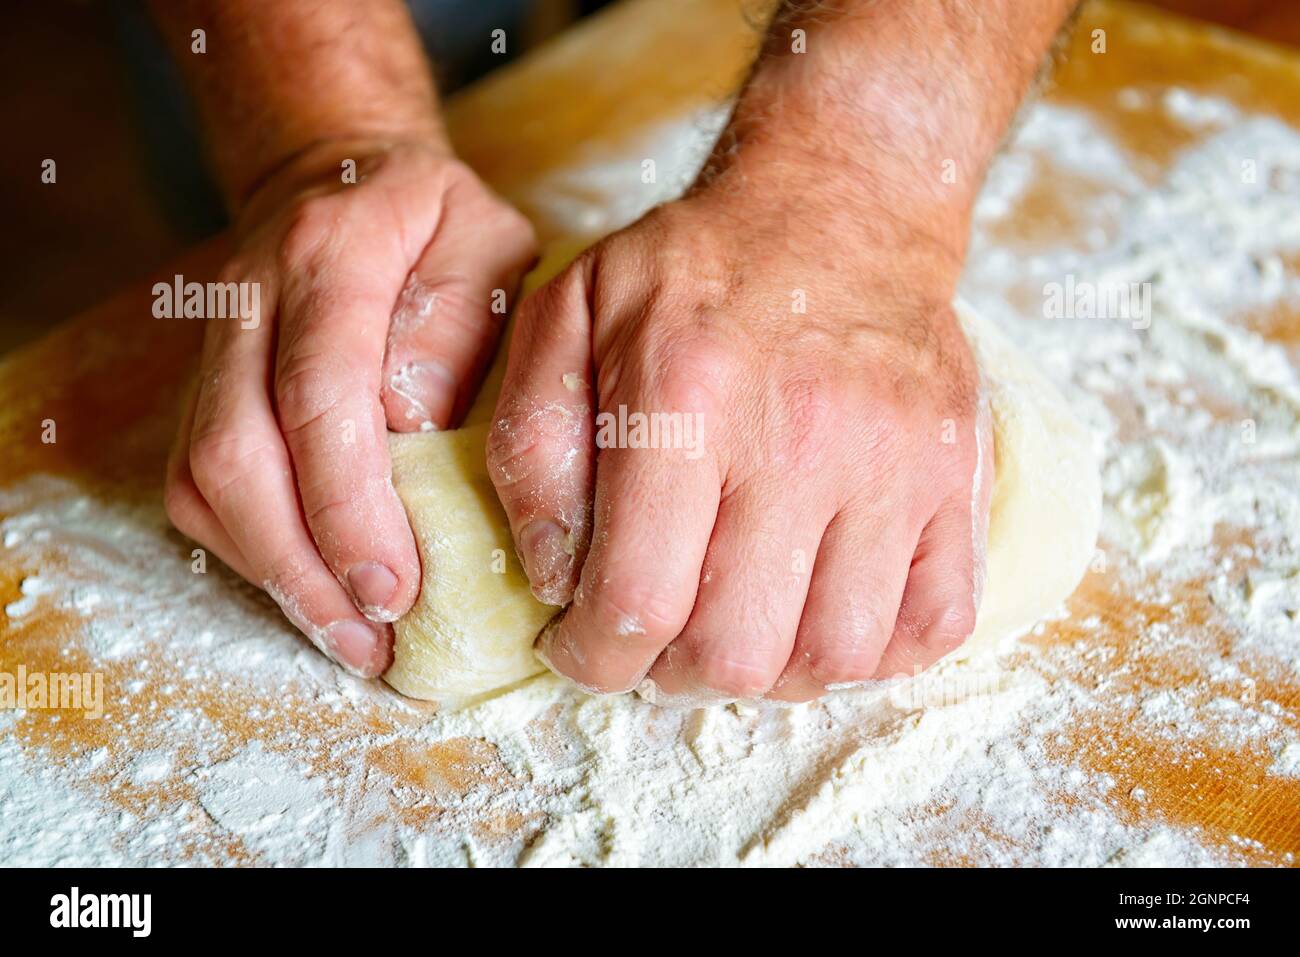 Preparing dough for white bread, rolls, pizza. Yeast dough made from wheat flour. Stock Photo